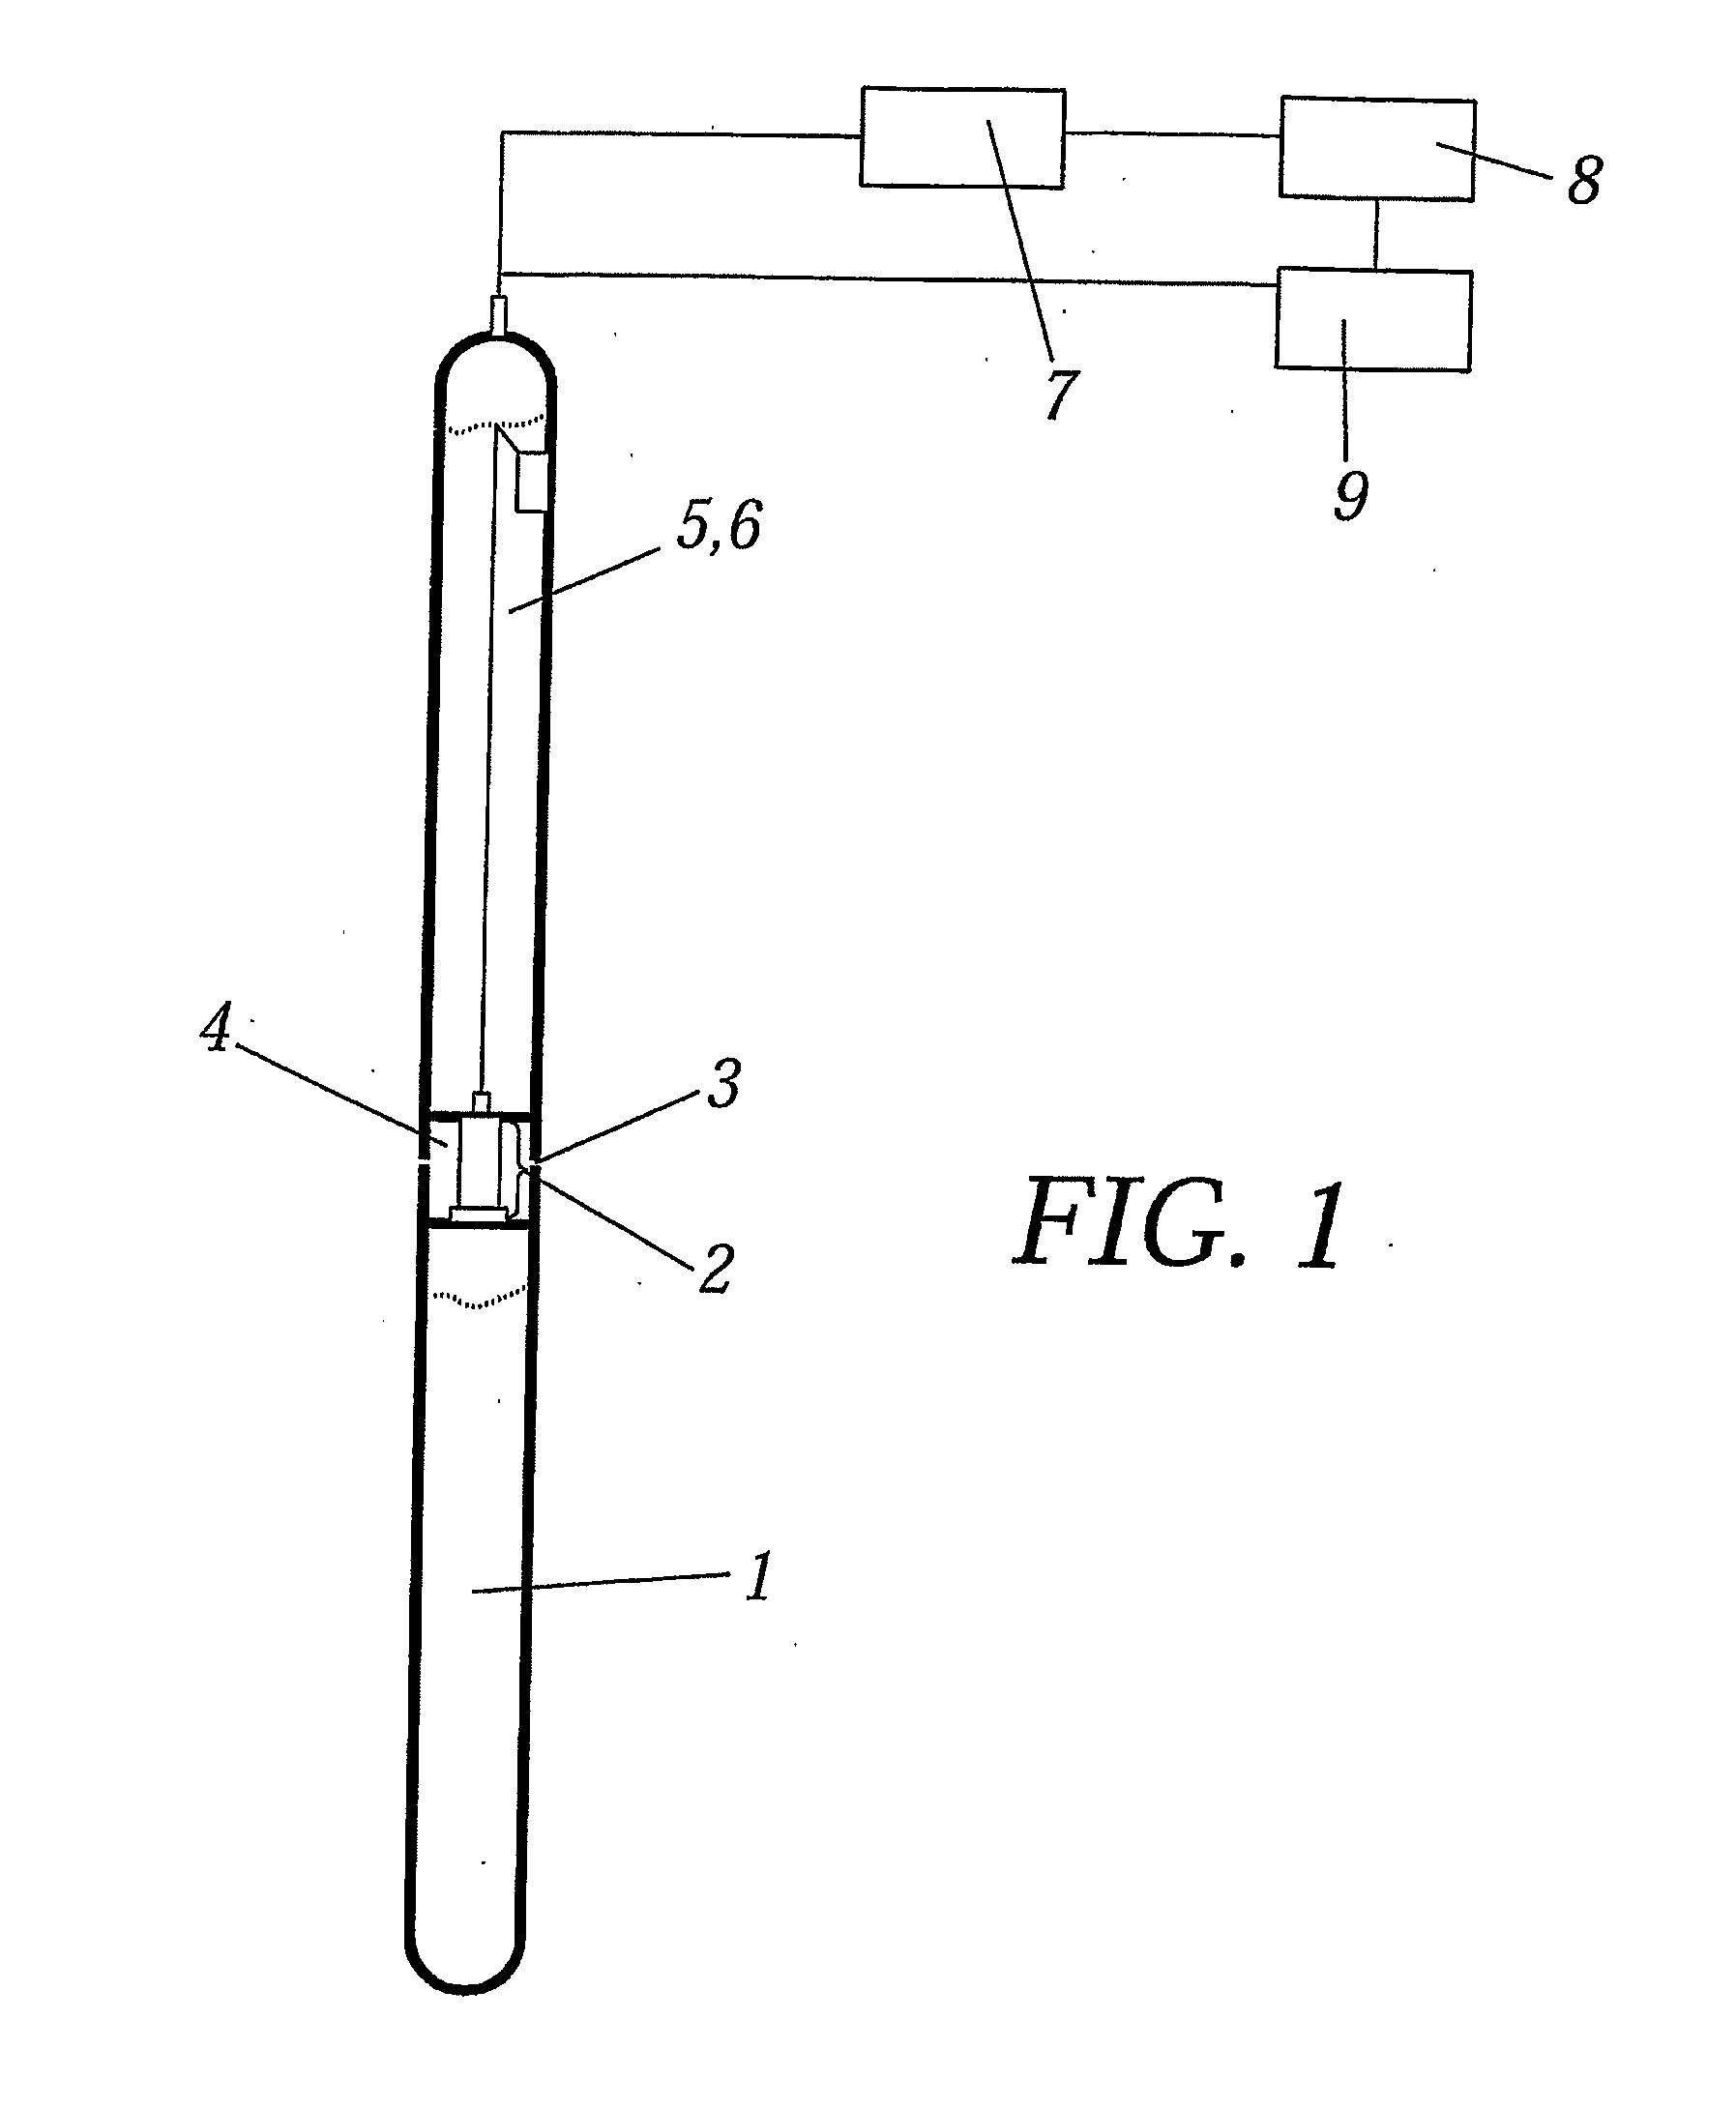 Method for the Treatment of the Obstructed Zones of the Parent Rock of Hydrocarbon-Producing Strata Adjacent to a Gas and Oil Well Drilling Zone in Order to Increase Productivity